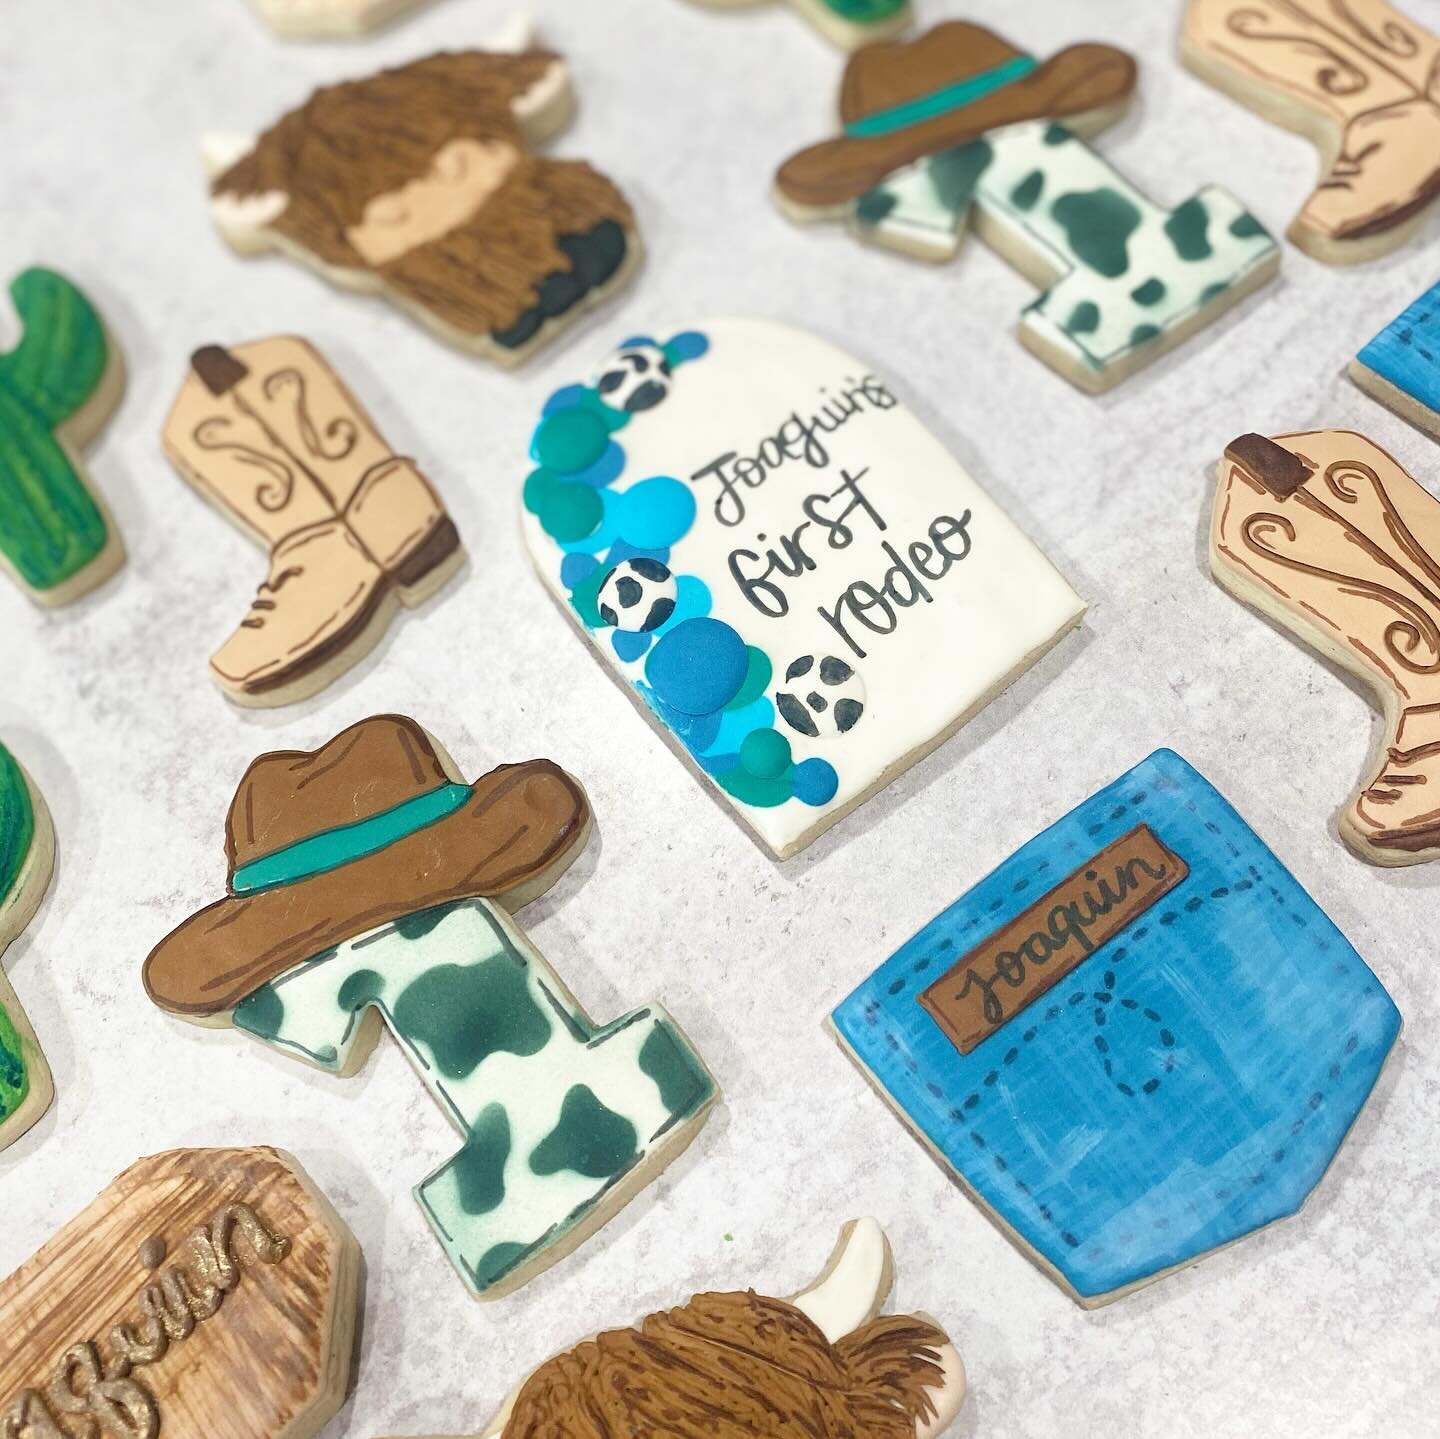 first rodeo 🐮🌵💙🐄⁣
⁣
⁣
⁣
⁣
⁣
⁣
⁣
⁣
⁣
#Talentedcookiers #cookiedecorator #cookiers #rodeo #cookietools #cookiestencils #decoratedcookies #icing  #cookier #cutecookies #astroscookies #royalicingcookies #instacookies #cookie #royalicing #airbrush #co